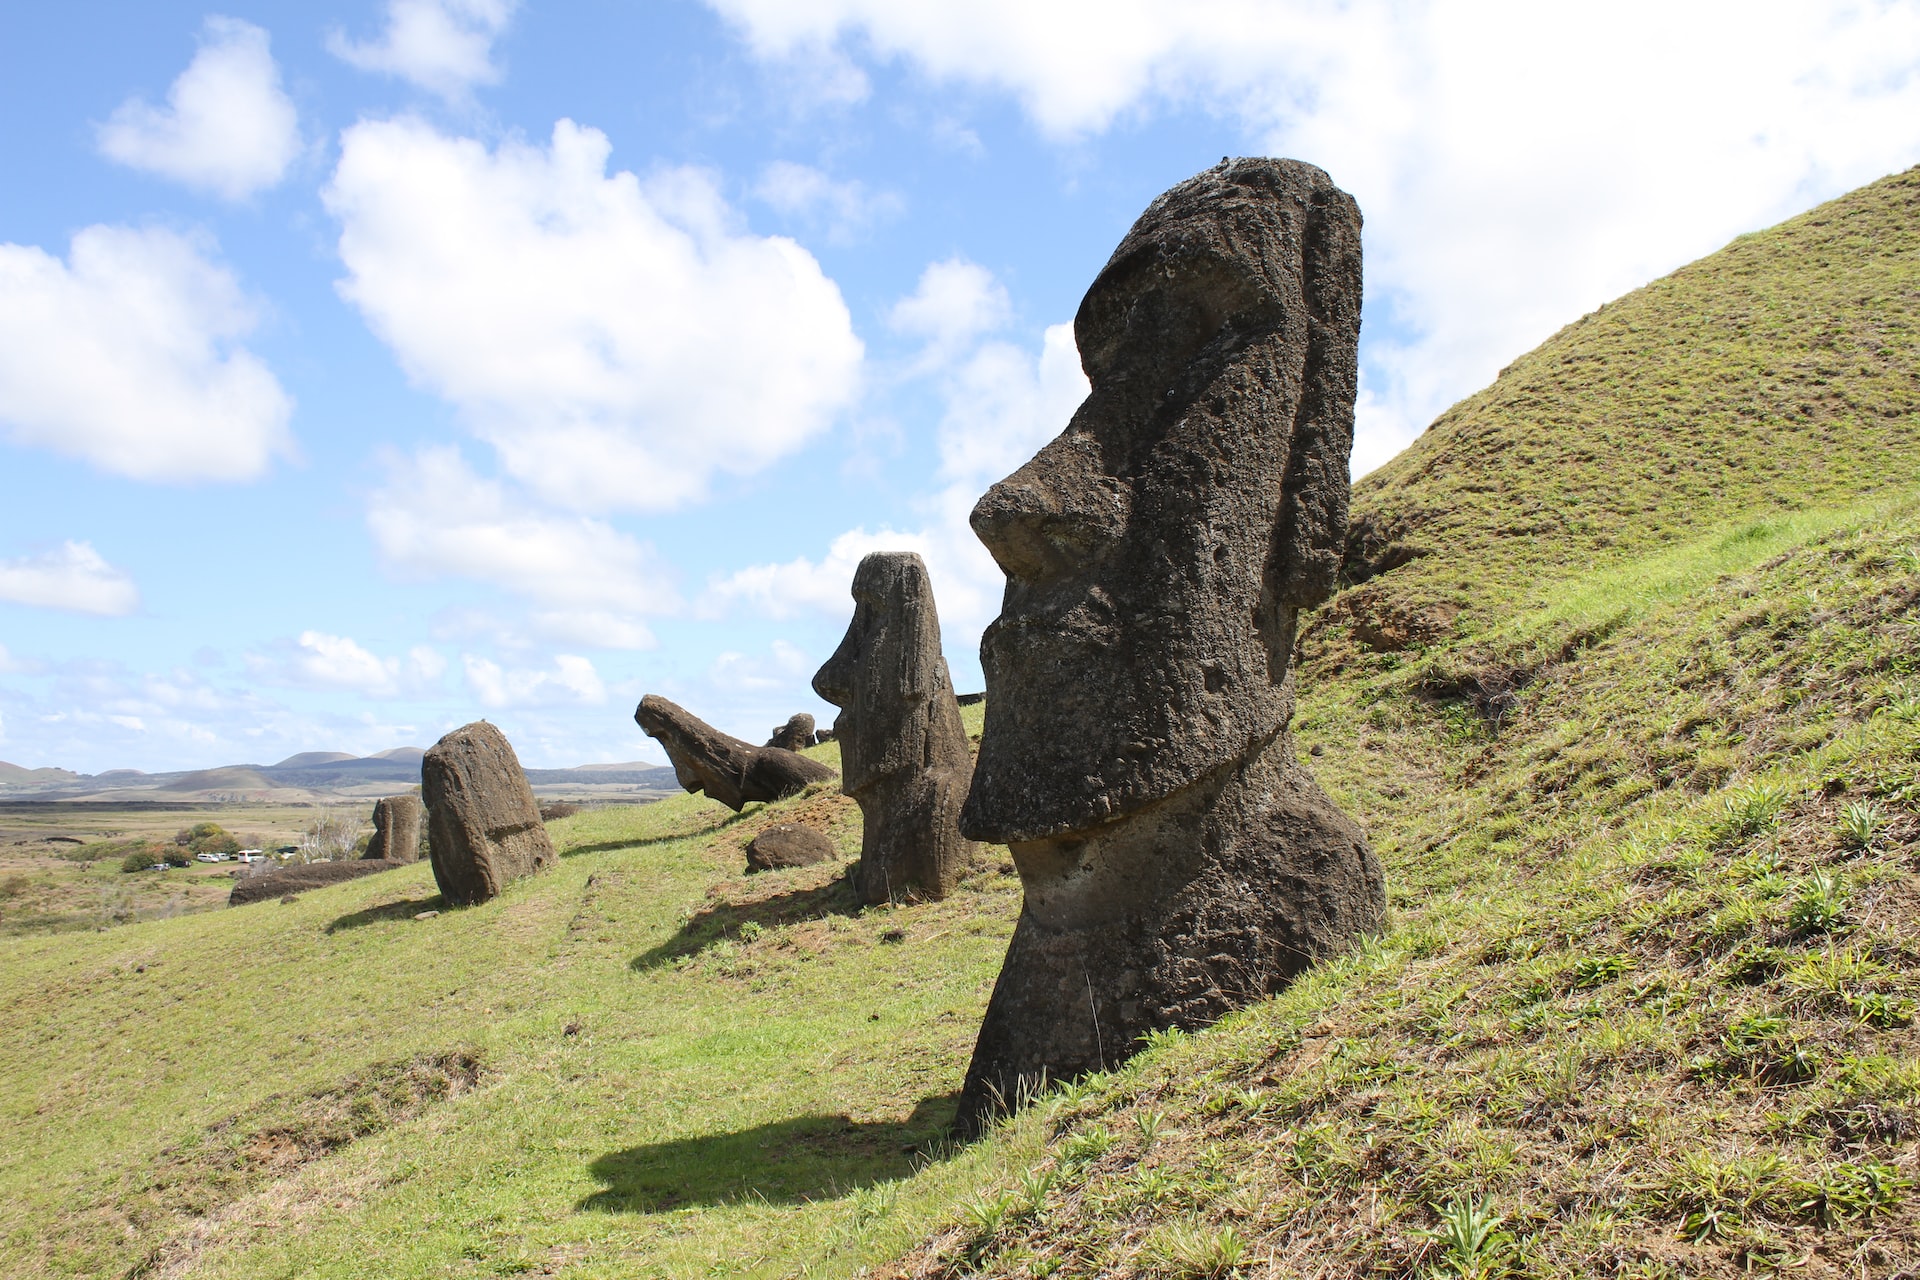 See Moai statues in Easter Island
